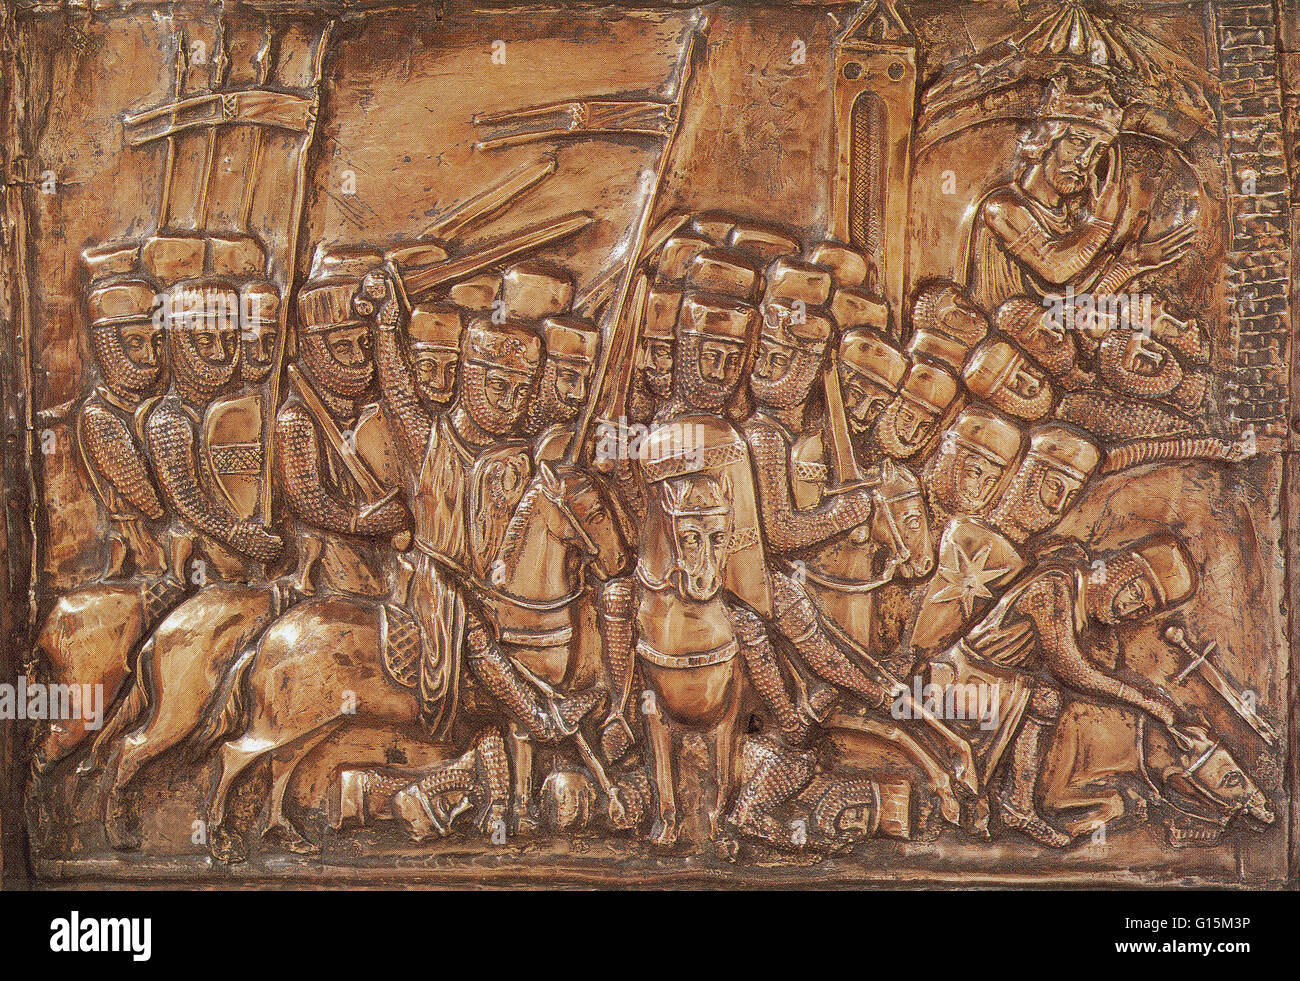 13th century panel from the Silver Shrine shows Charlemagne in the upper right corner leading his knights.  Charlemagne (742-814 AD) was King of the Franks from 768 and Emperor of the Romans (Imperator Romanorum) from 800 to his death in 814. He expanded Stock Photo